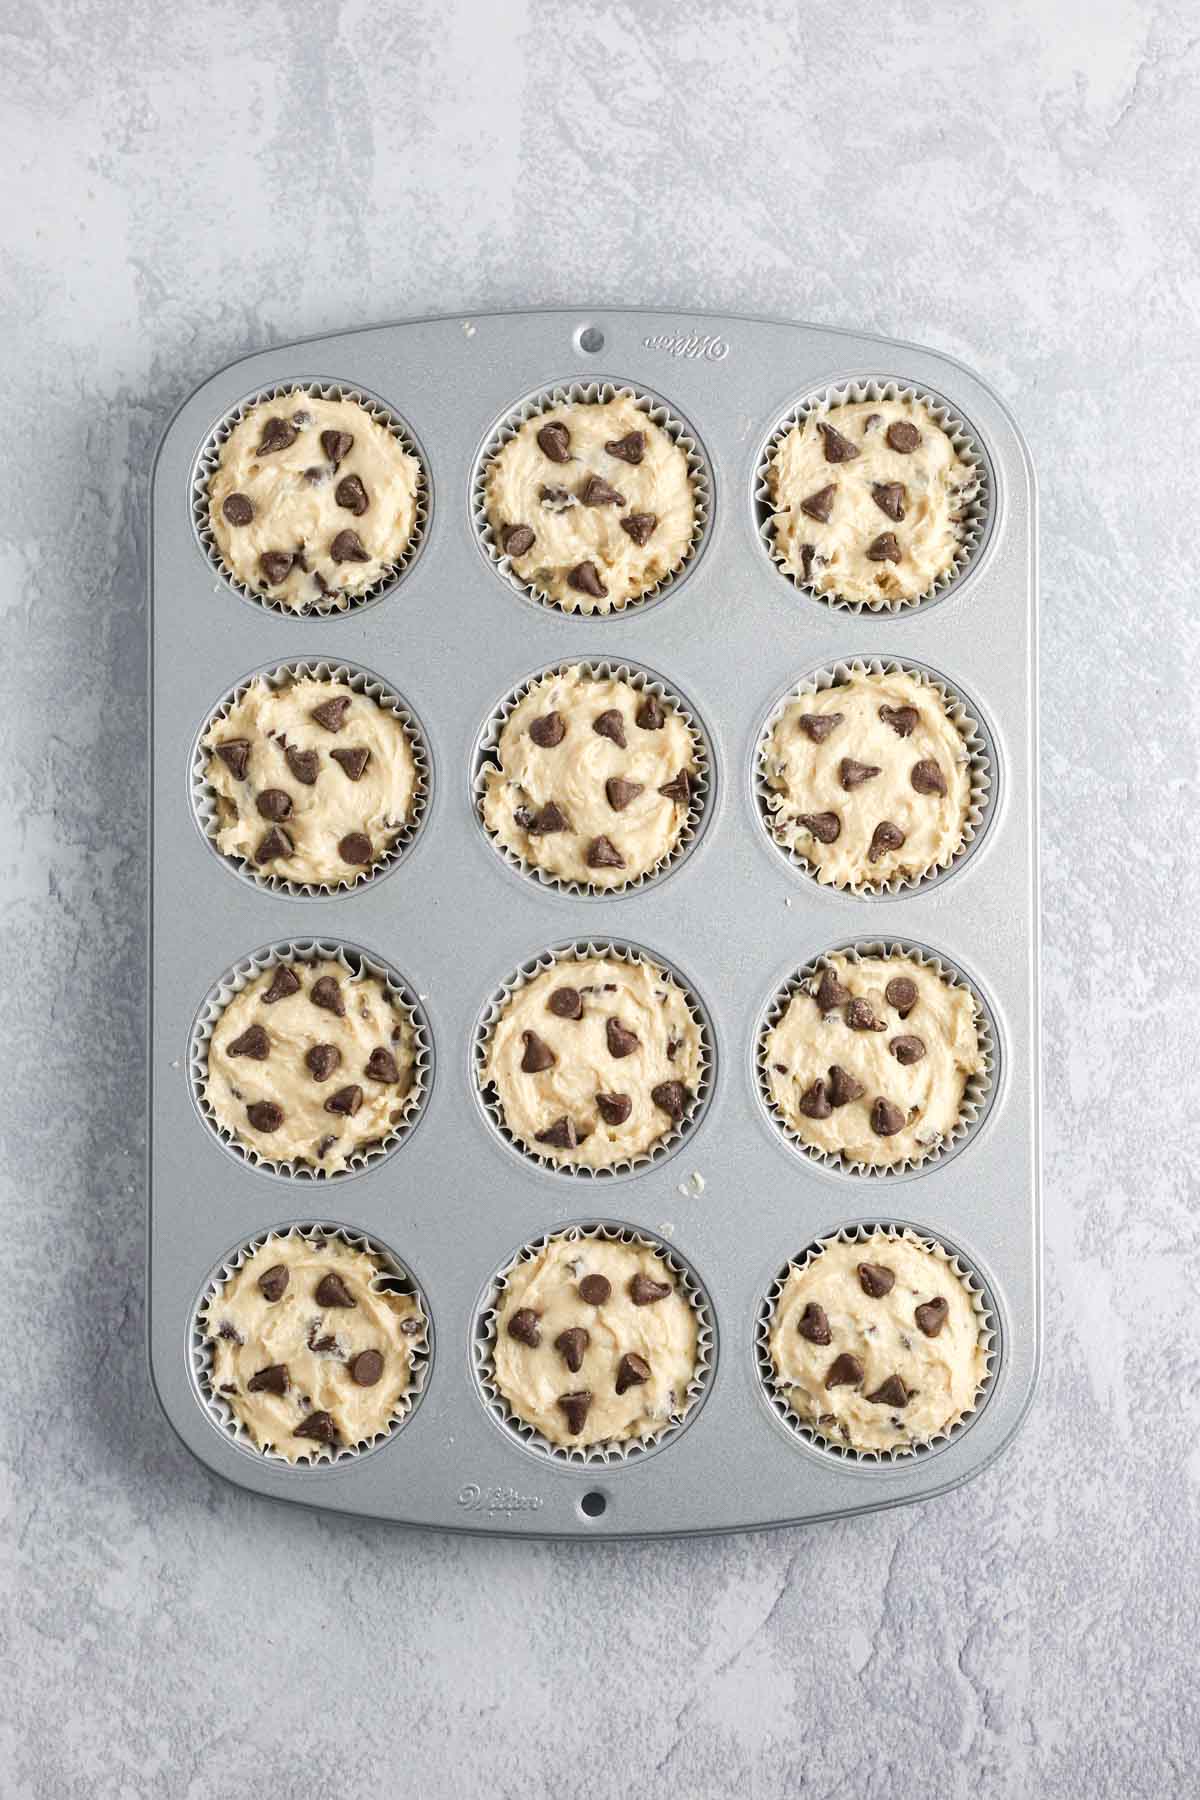 adding extra chocolate chips into the muffin batter before baking.